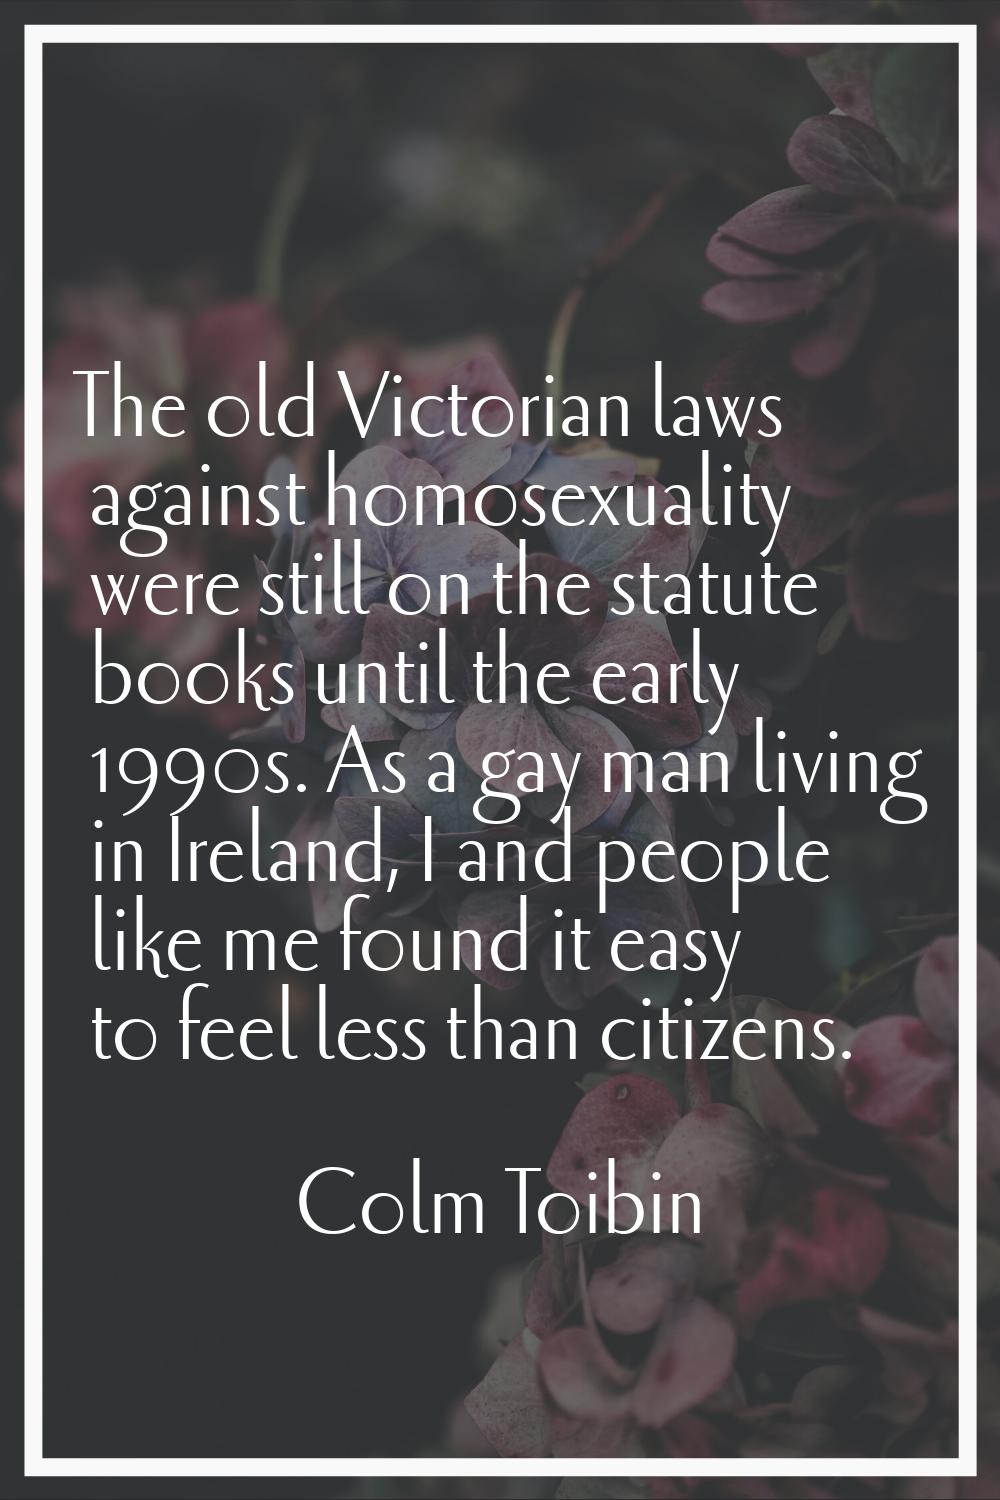 The old Victorian laws against homosexuality were still on the statute books until the early 1990s.